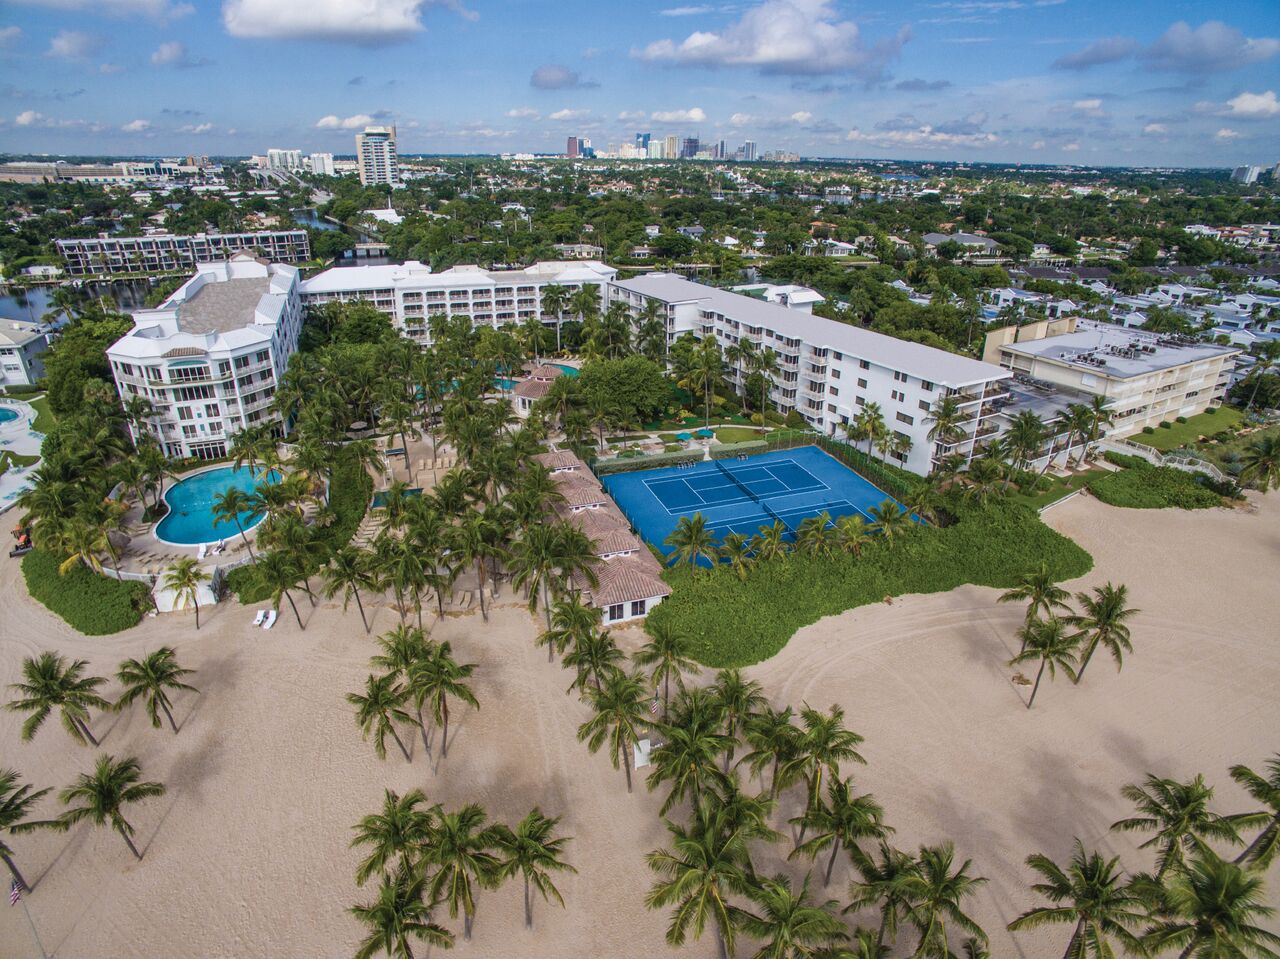 lago mar resort from above aerial